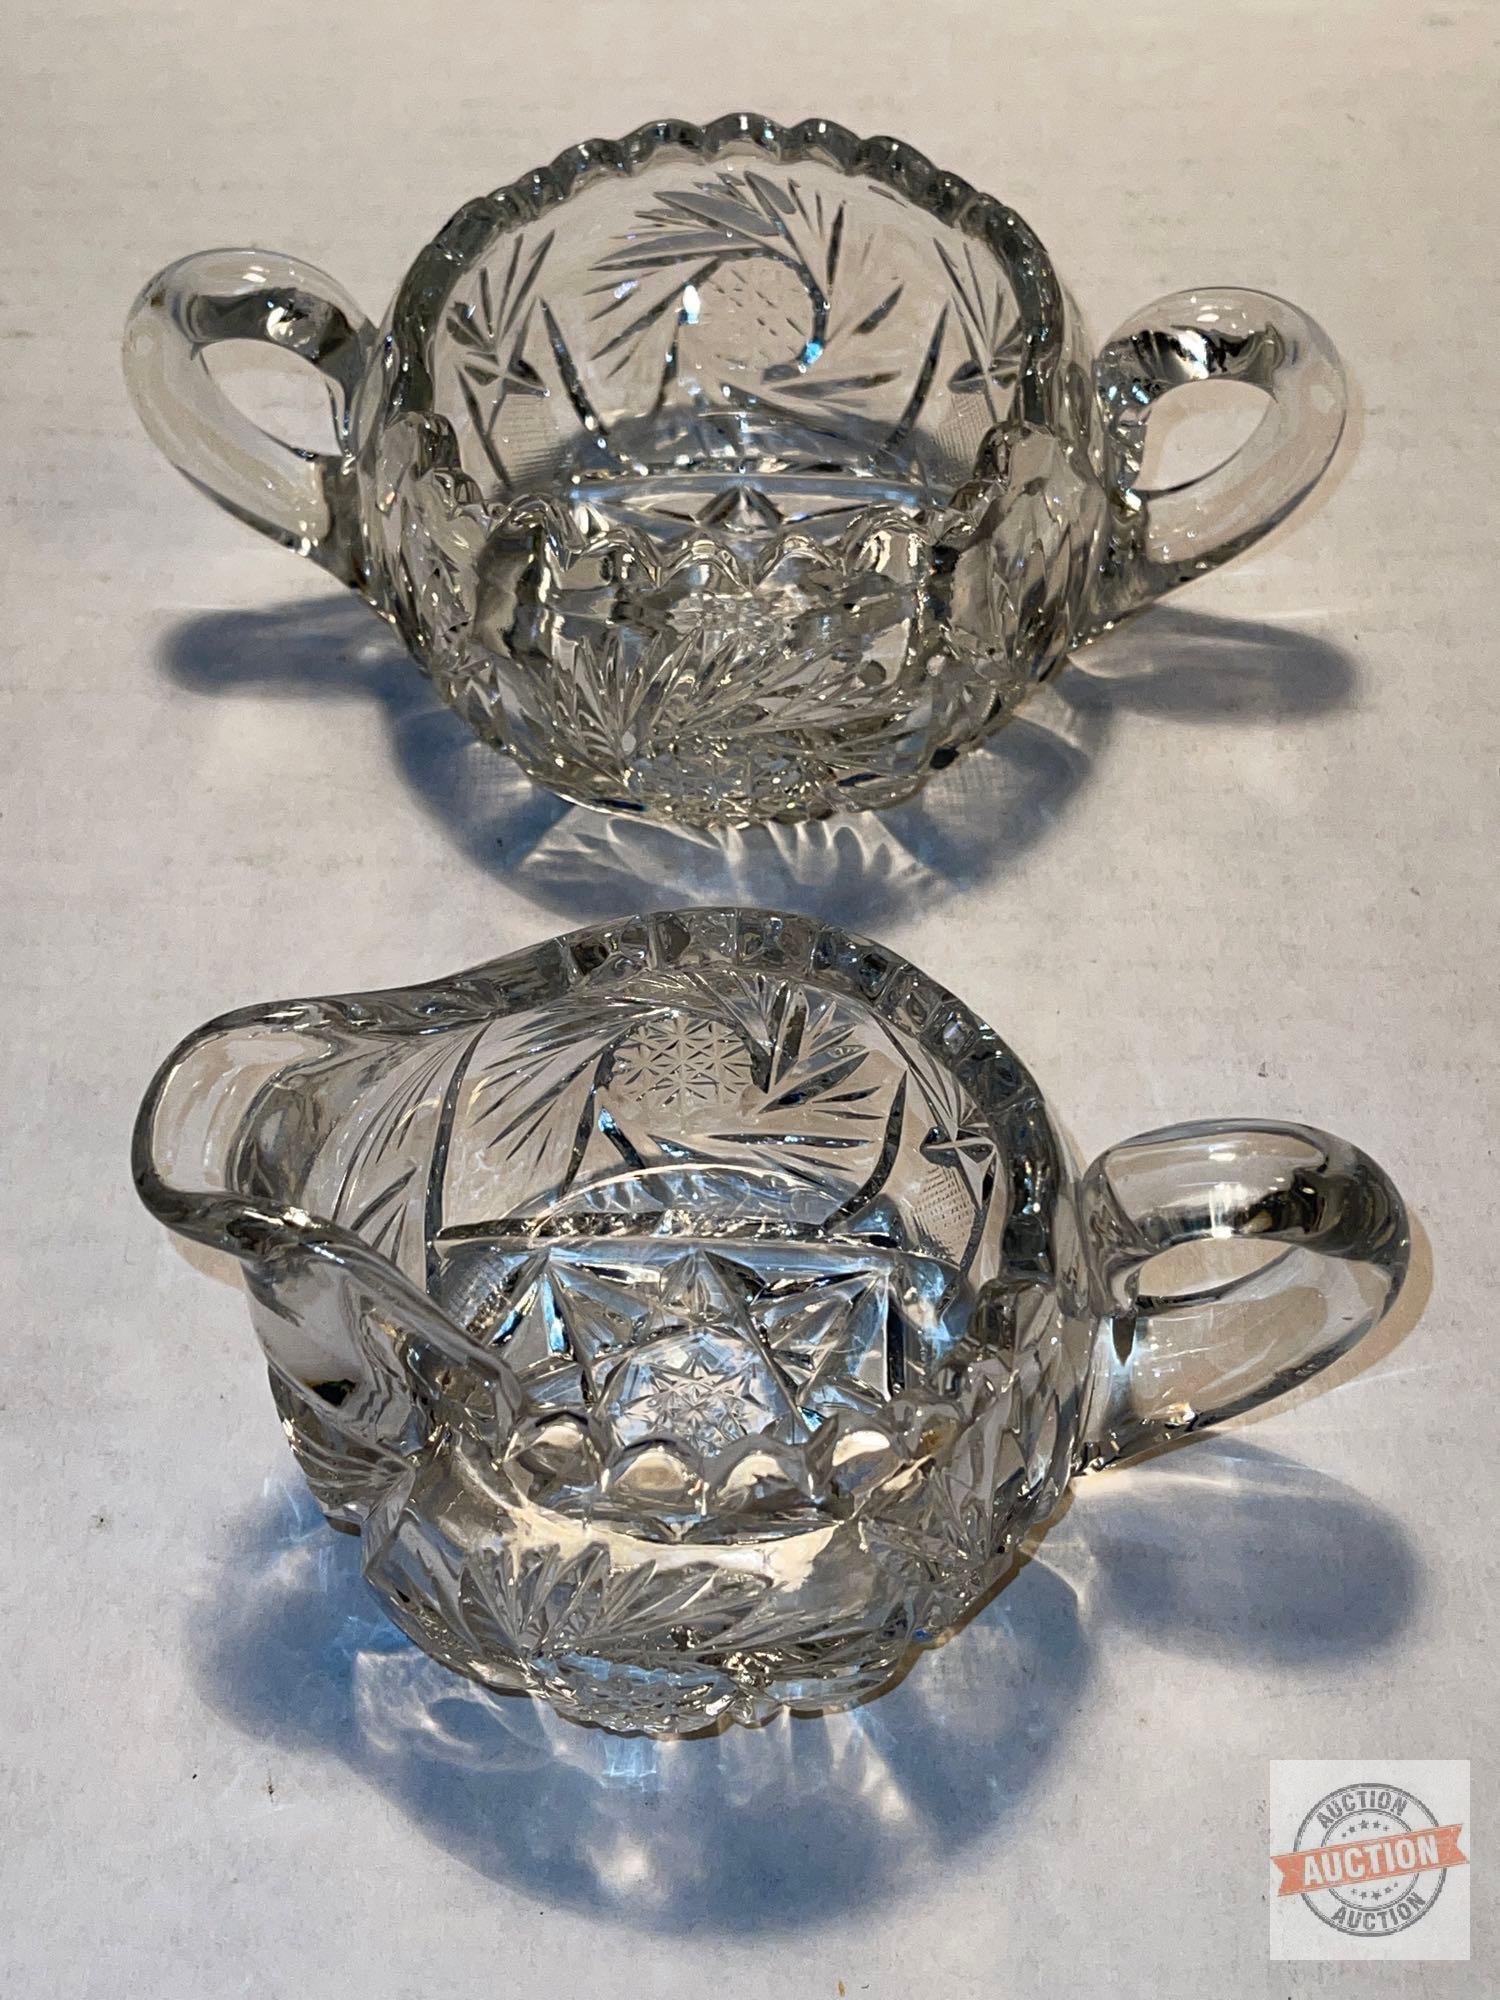 3 lead crystal serving dishes